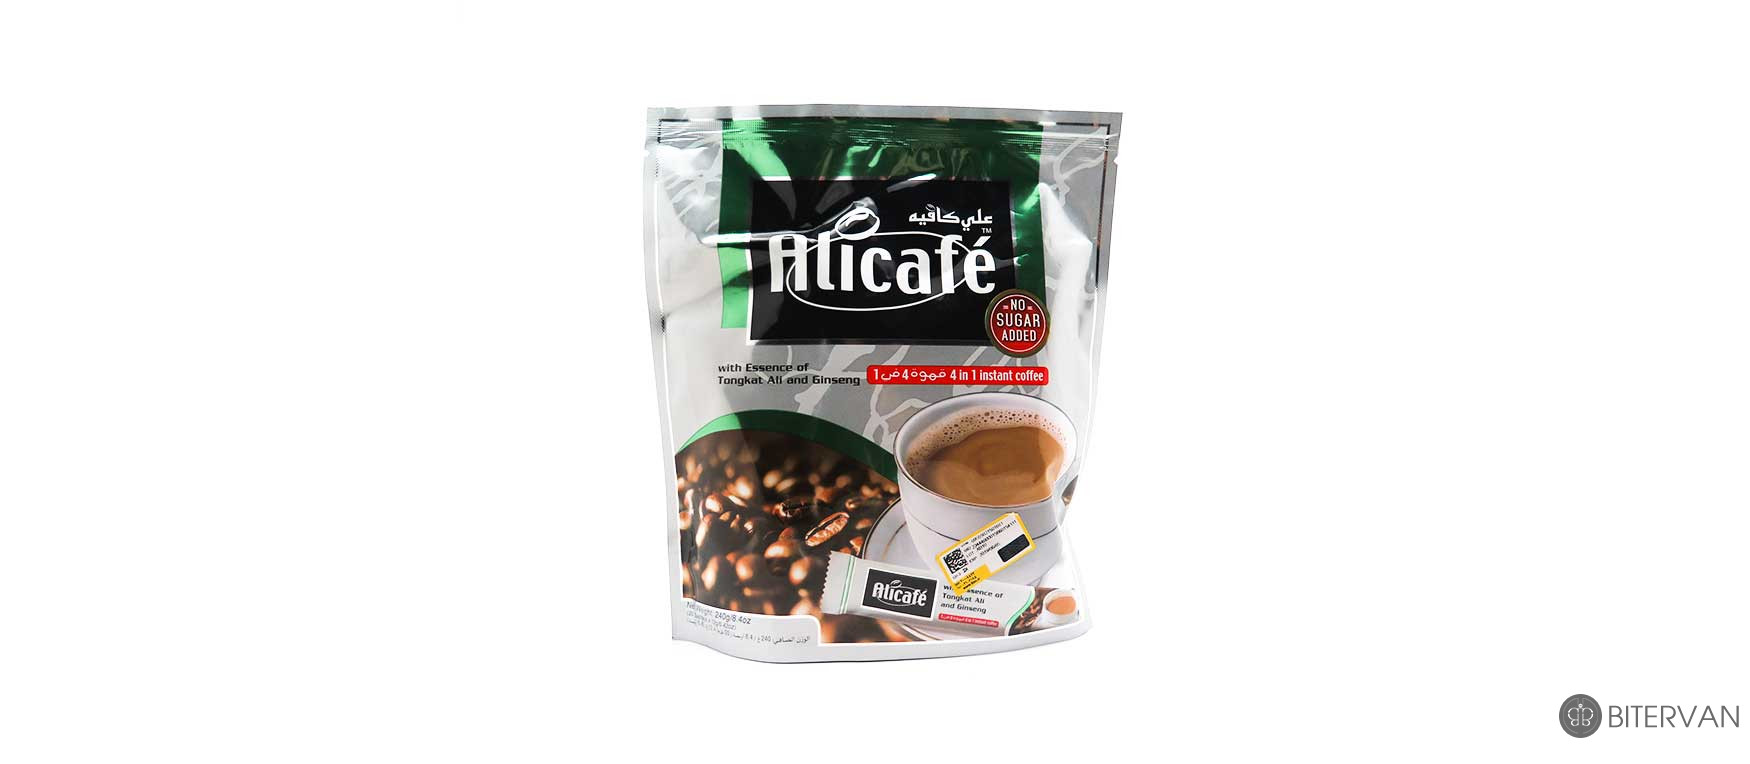 Alicafe with Essence of Tongkat Ali and Ginseng- 4 in 1- No Suger Added- 20 sachets